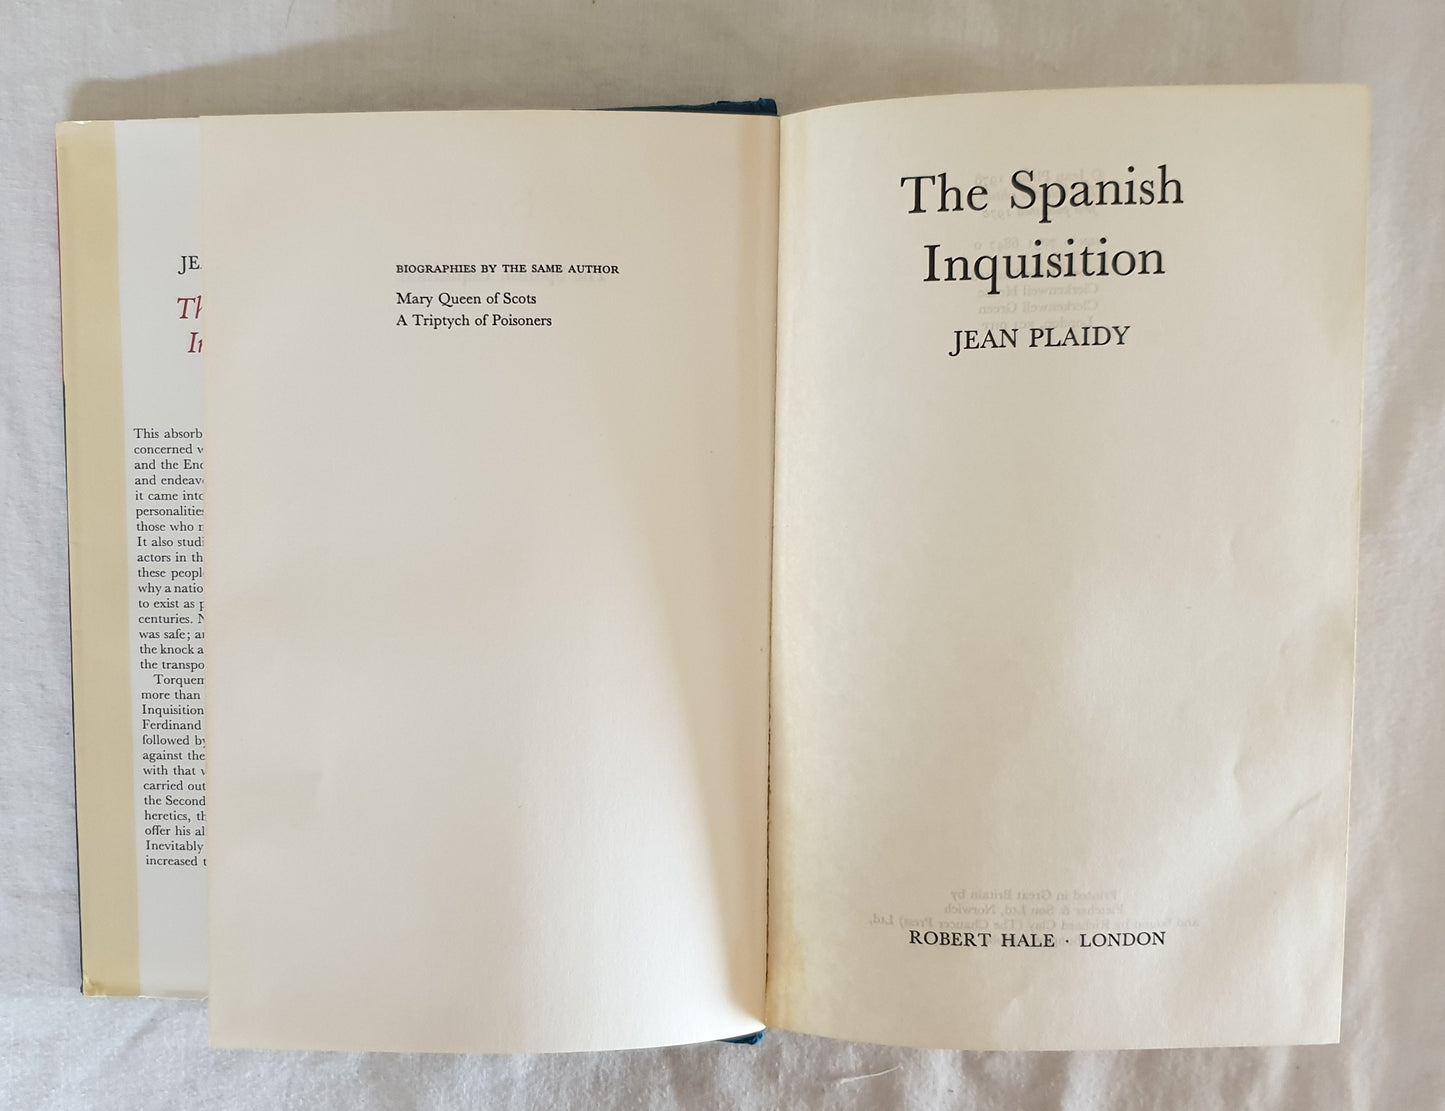 The Spanish Inquisition by Jean Plaidy